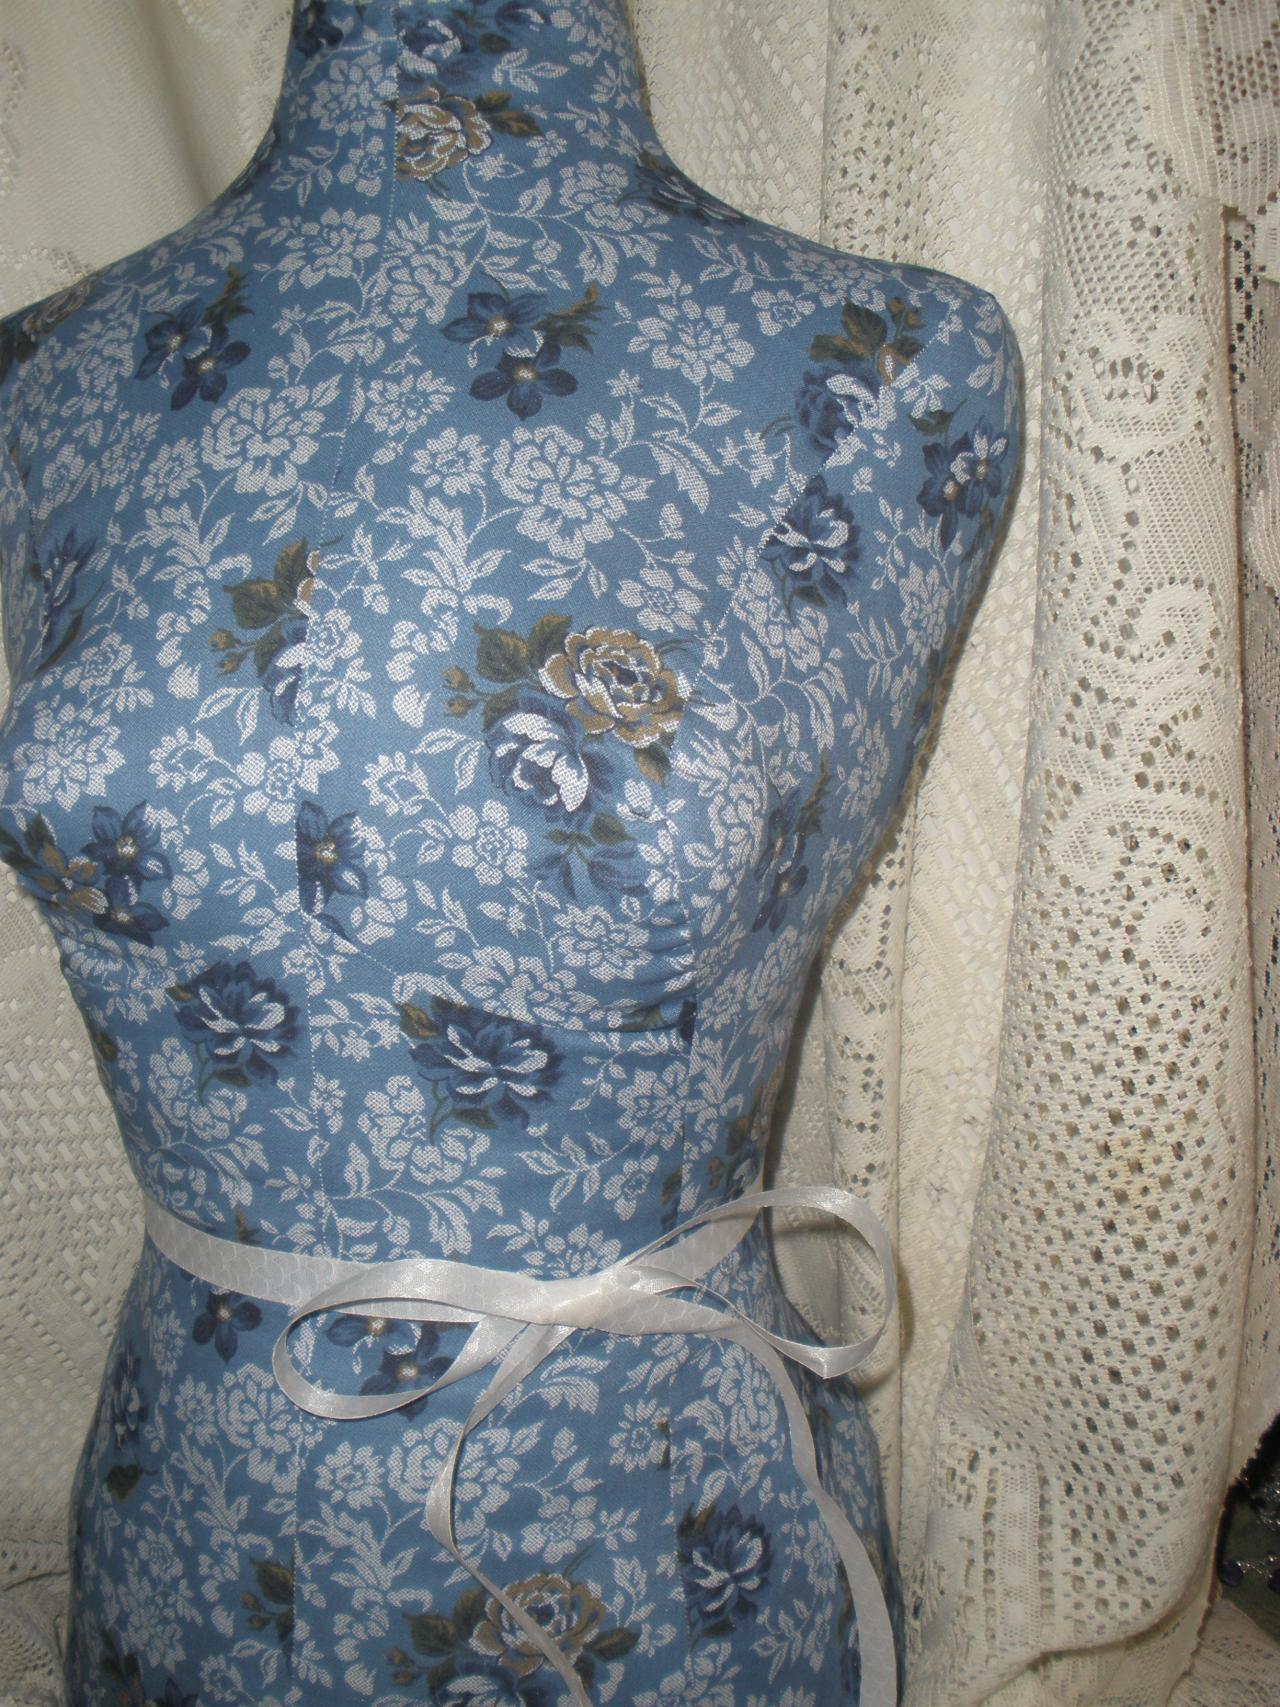 Boutique Dress Form Designs With Stand. Life Size Torso Great For Store Front Or Home Decor. Blue China Floral Print.